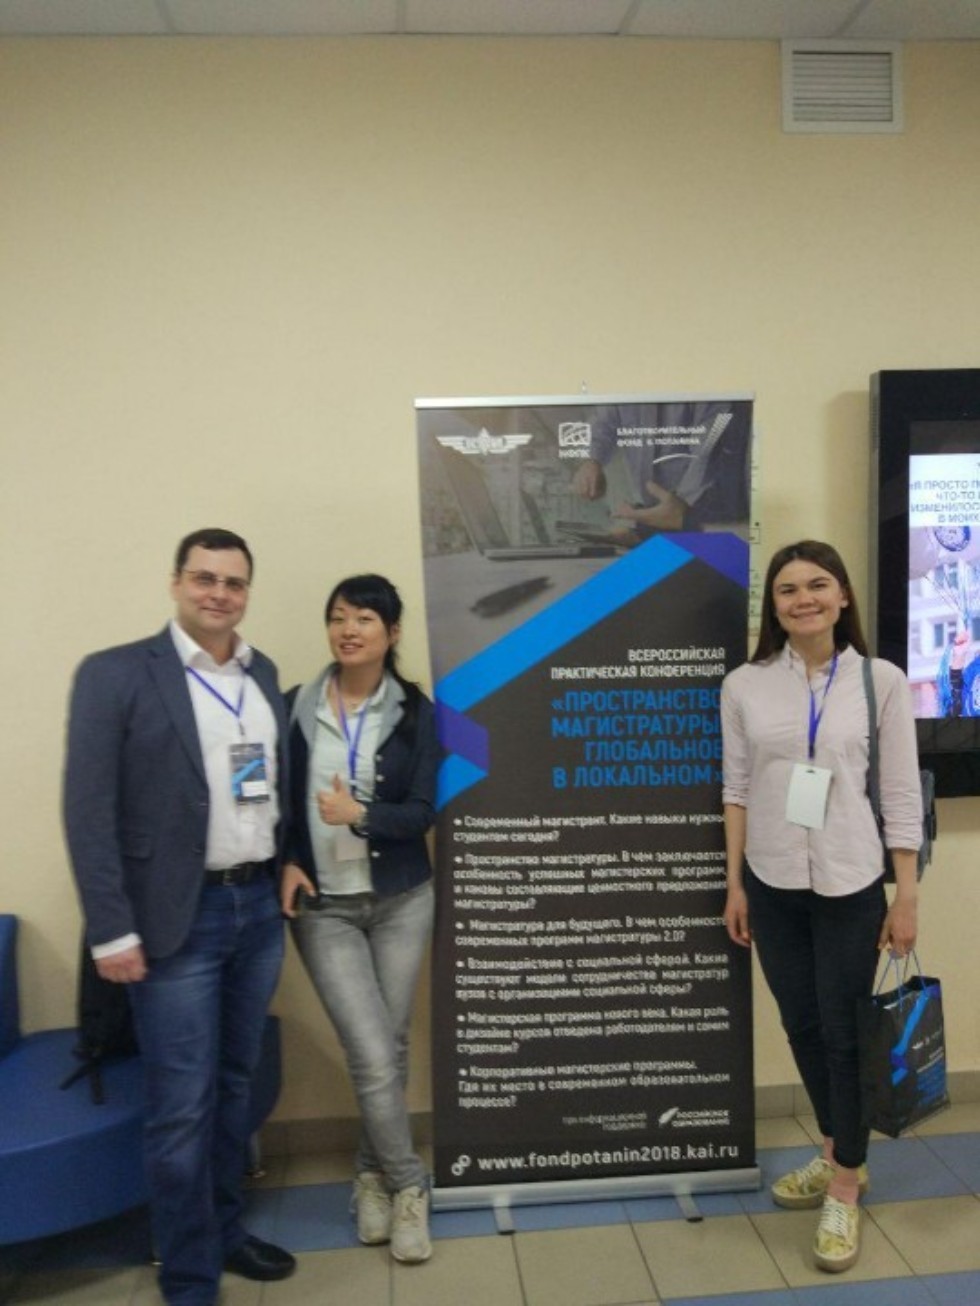 Laboratory of intelligent robotic systems participated in the All-Russian applied science conference 